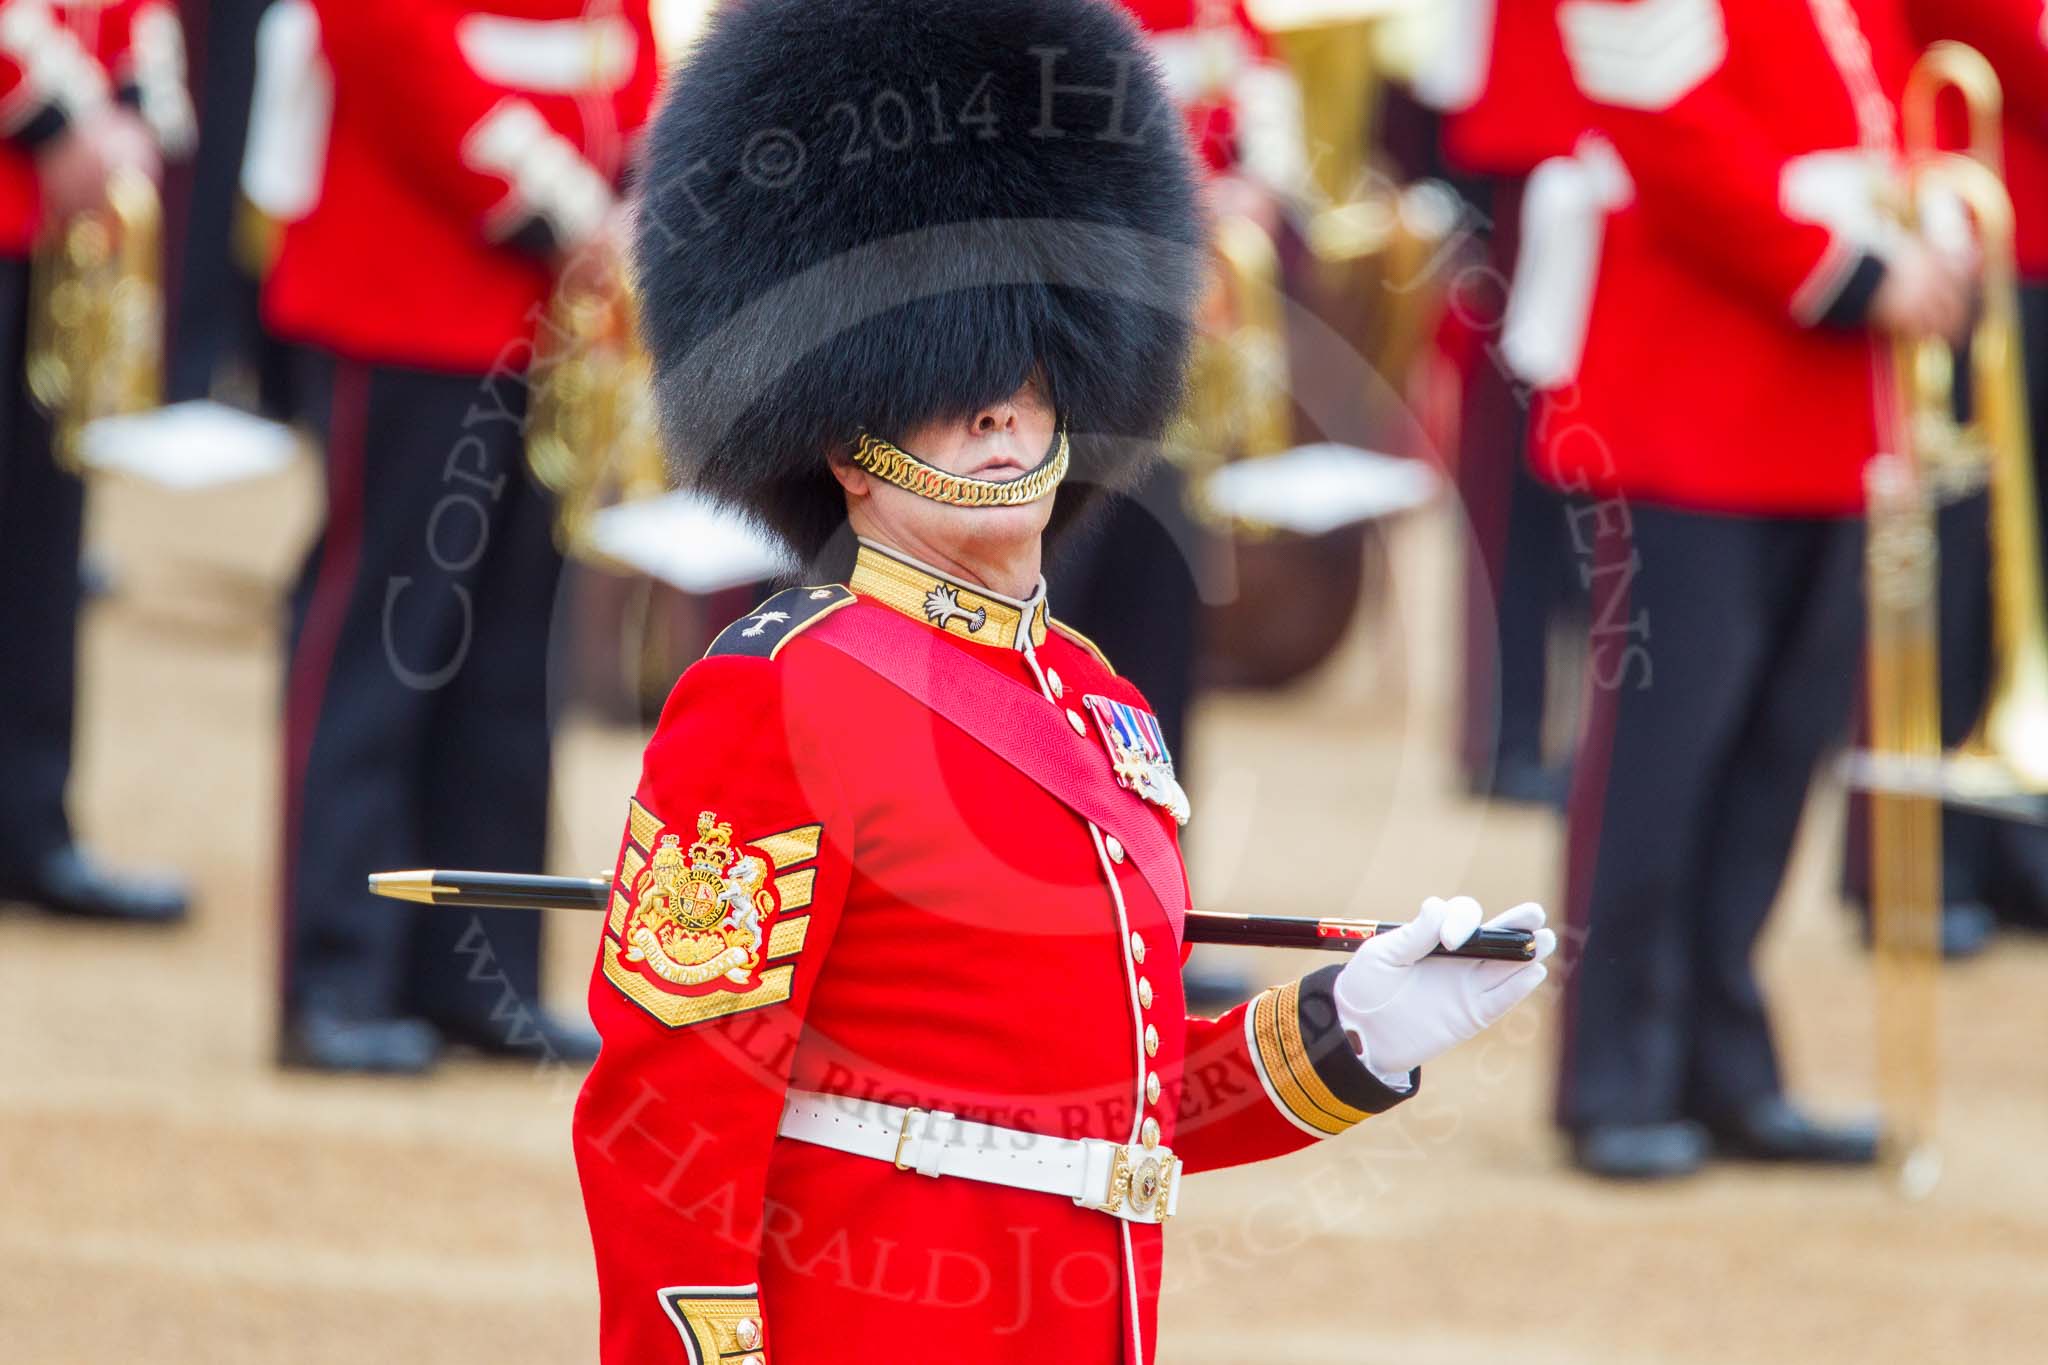 Trooping the Colour 2014.
Horse Guards Parade, Westminster,
London SW1A,

United Kingdom,
on 14 June 2014 at 10:29, image #163